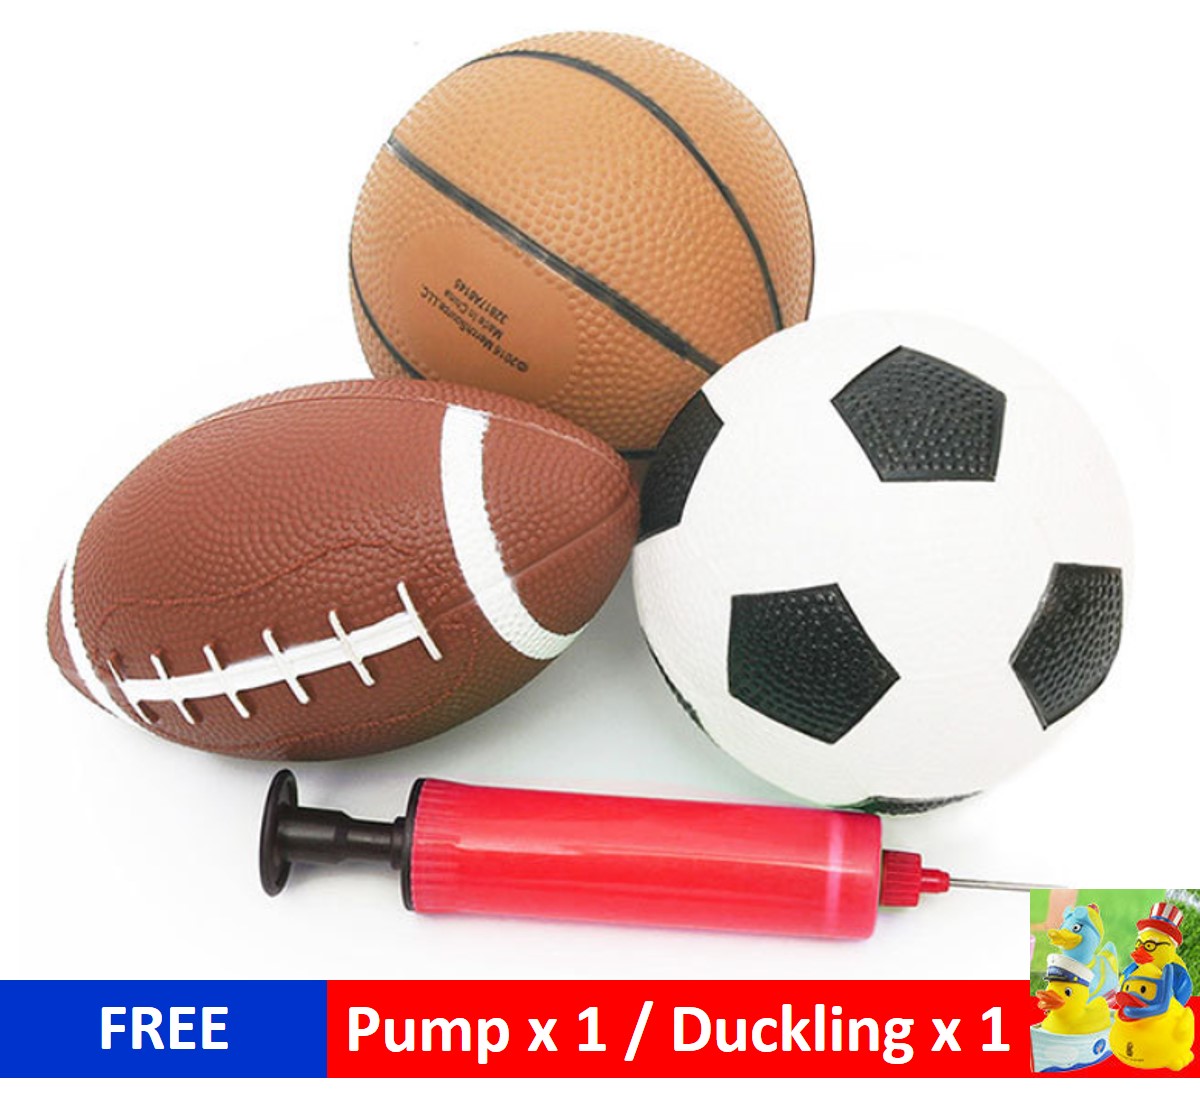 SPORTS 3 Pack BALLS Football Basketball Soccer Ball Kids Play Toy 2 Sets Avail 